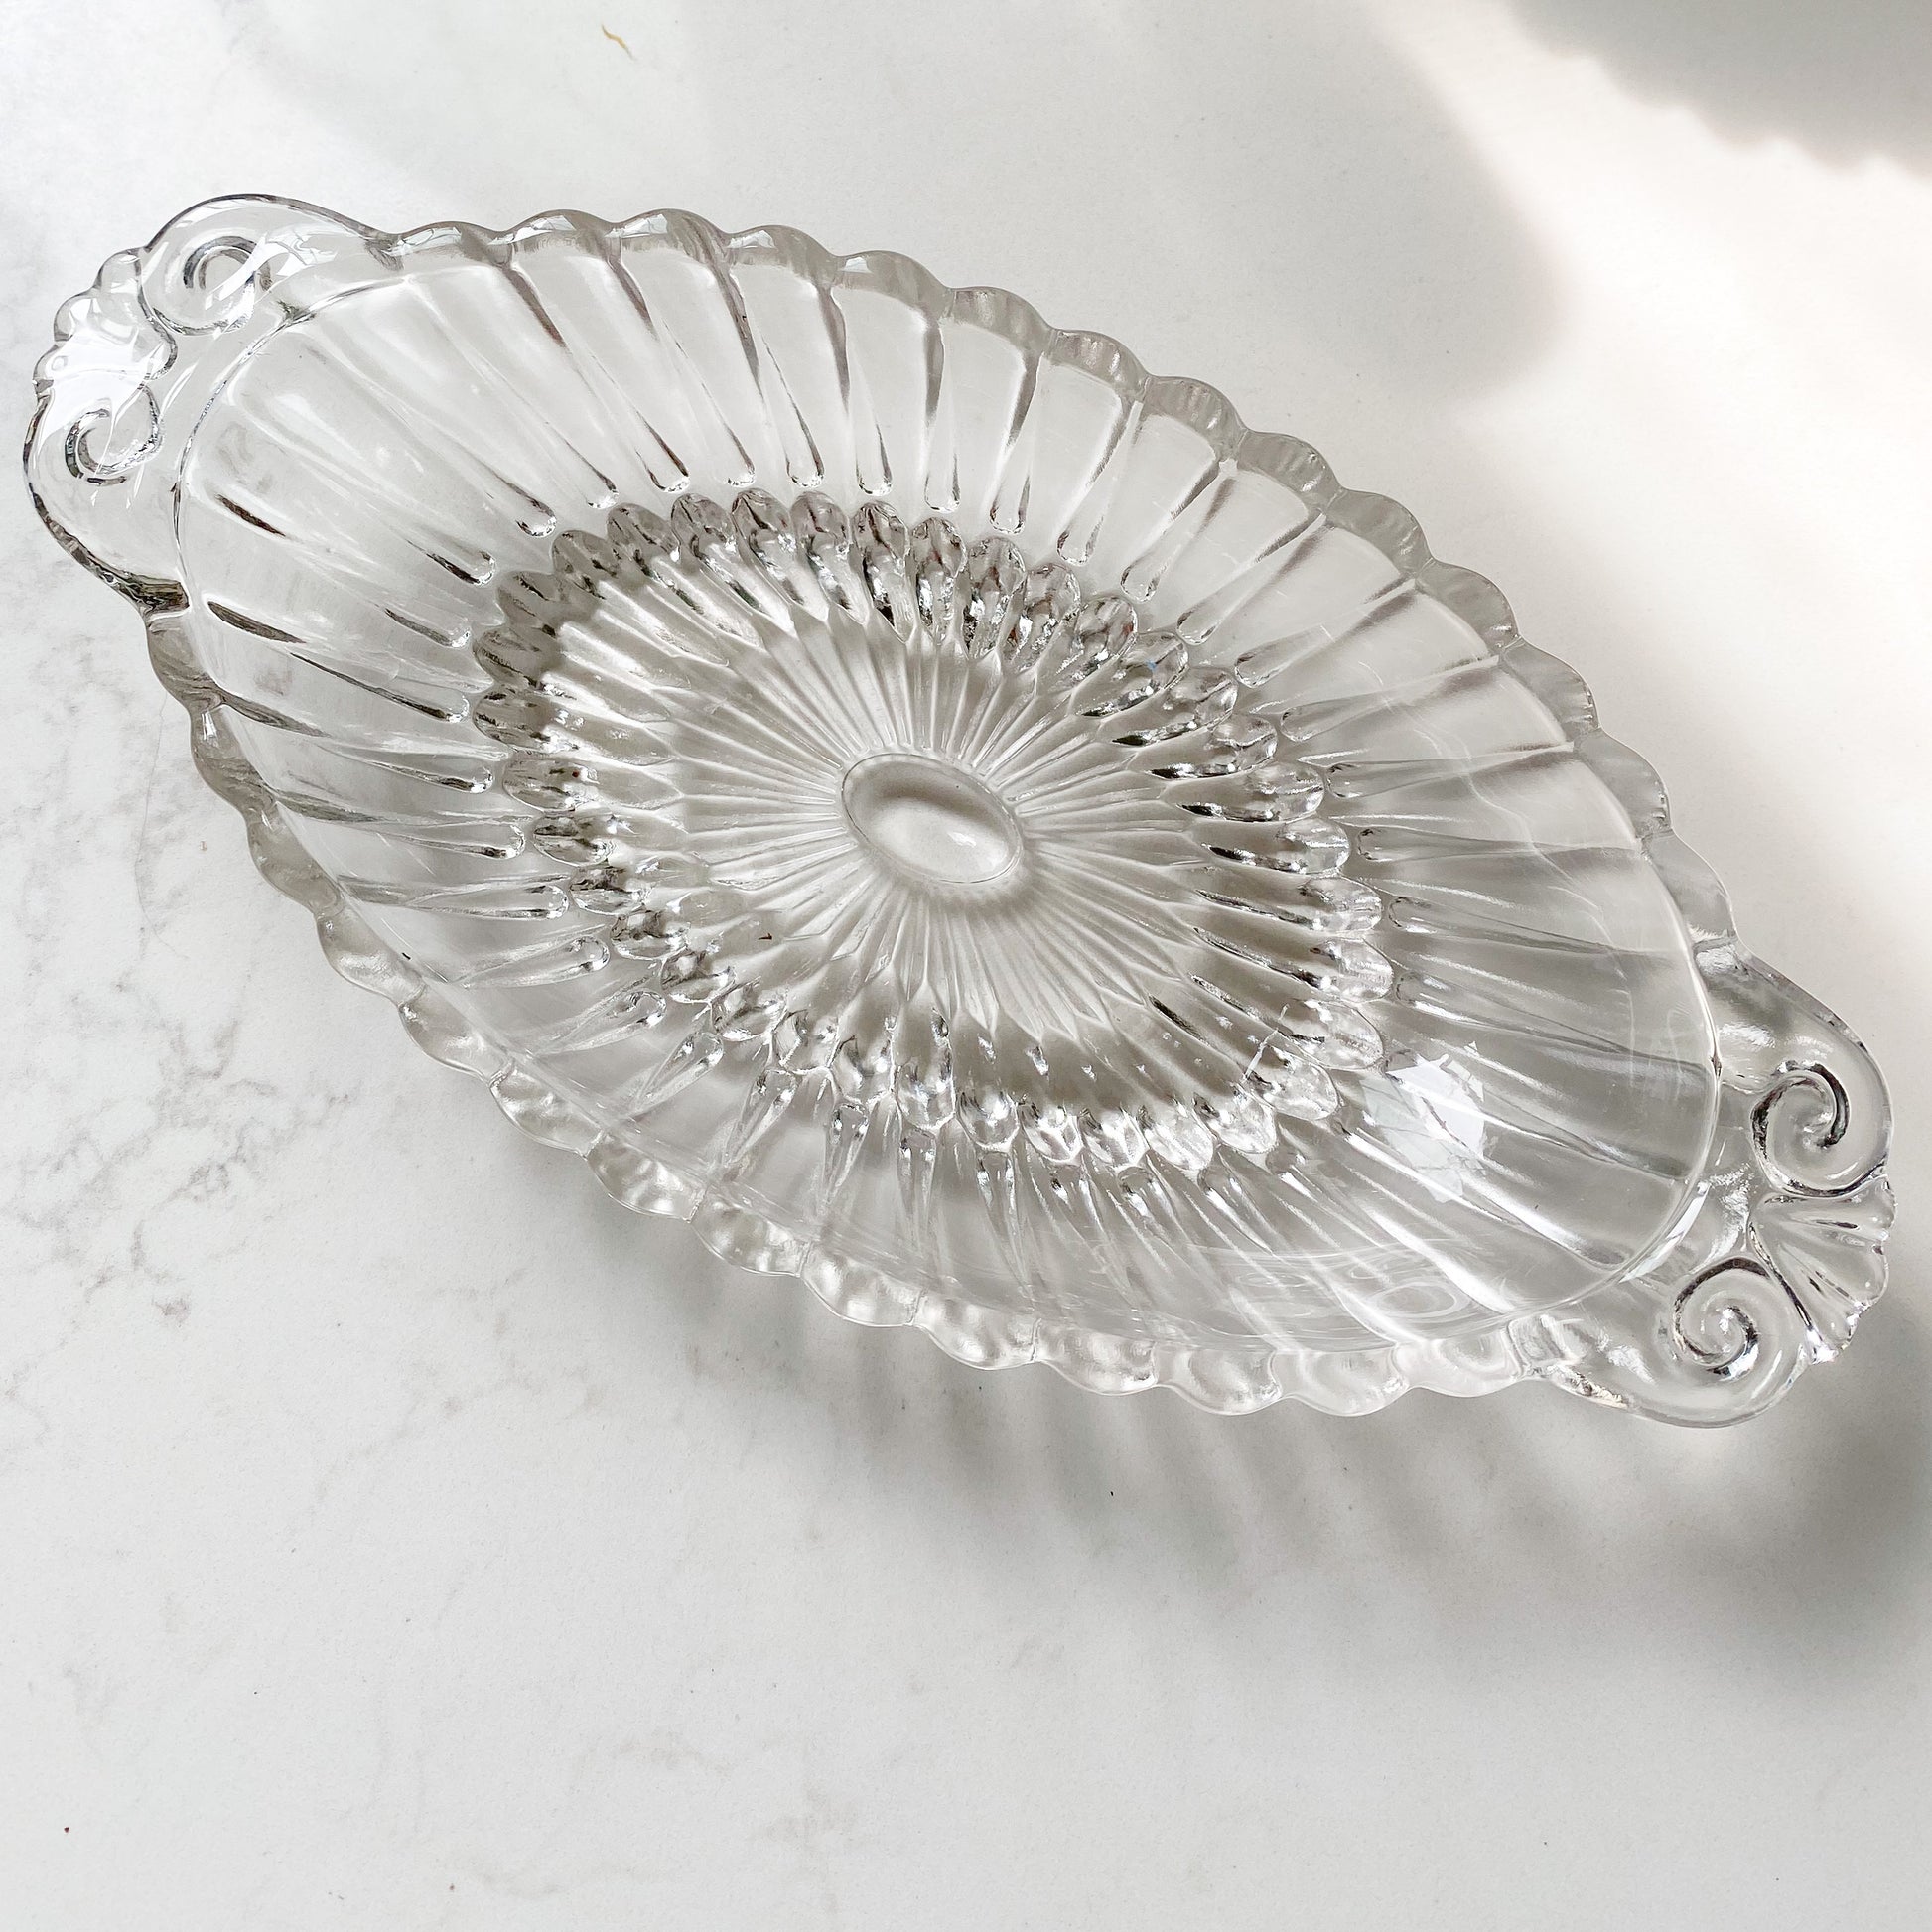 Tropical Sustainable Crystal Dish - Bellestyle 